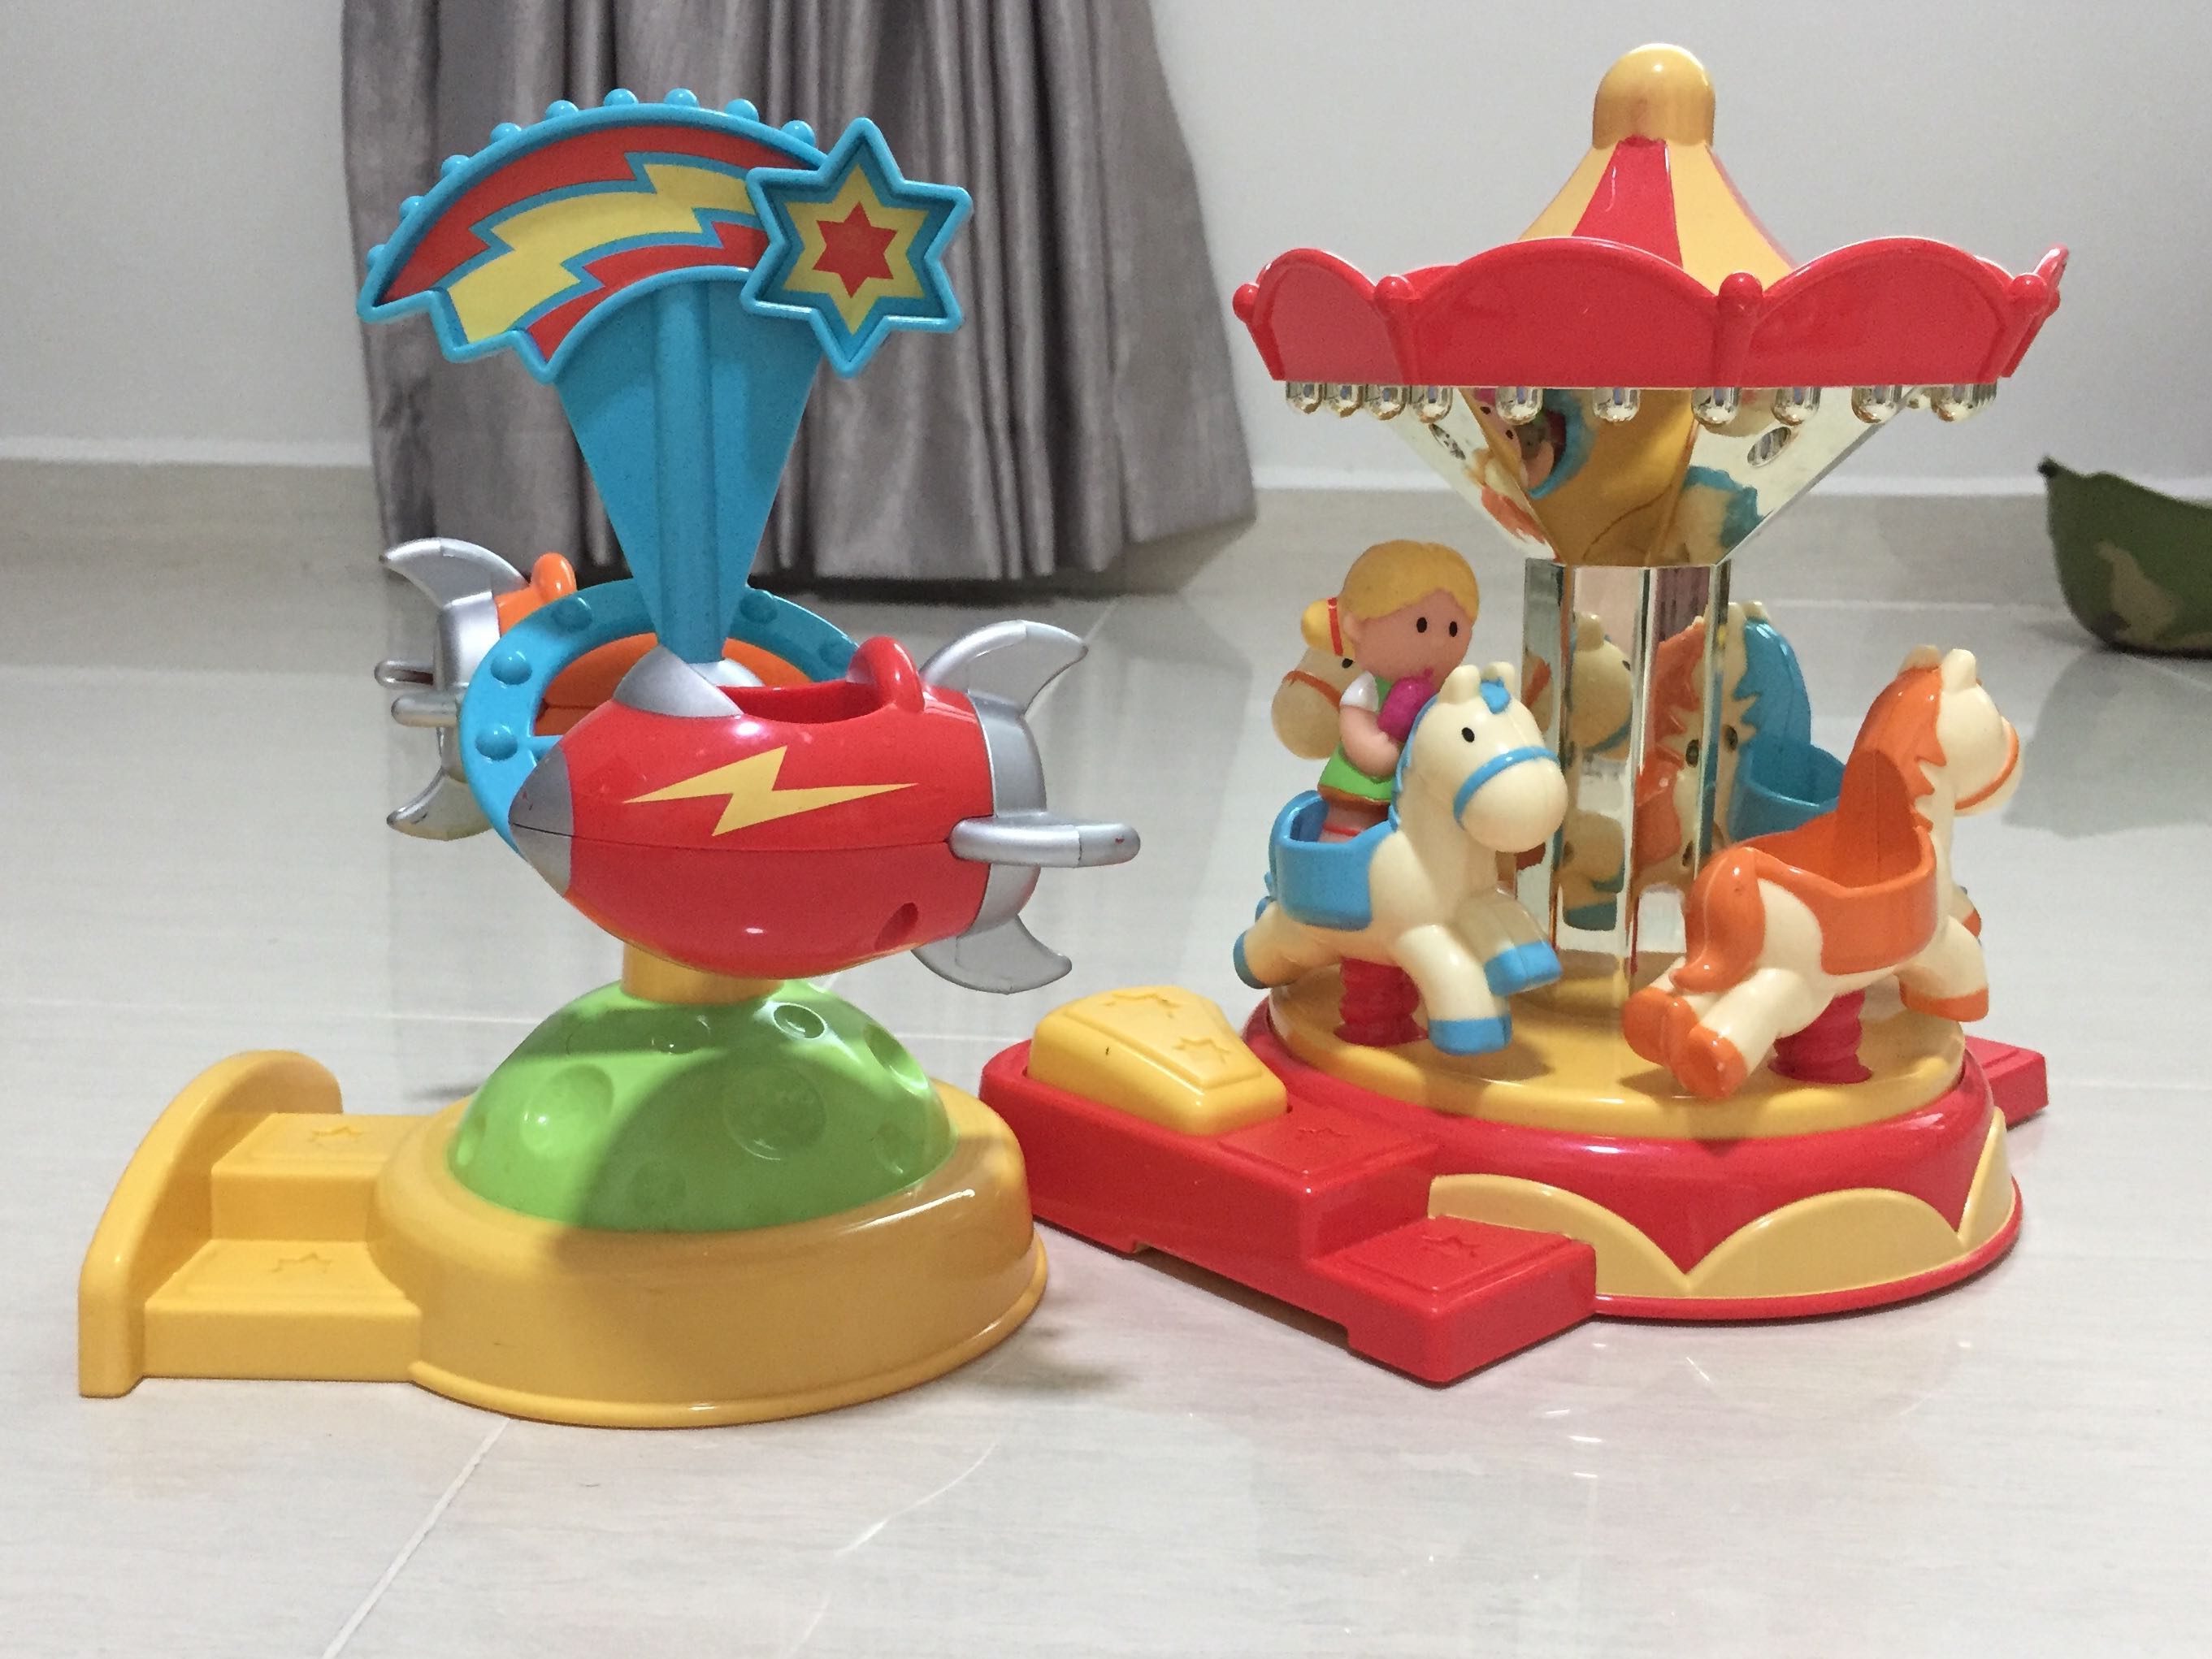 early learning centre figurines